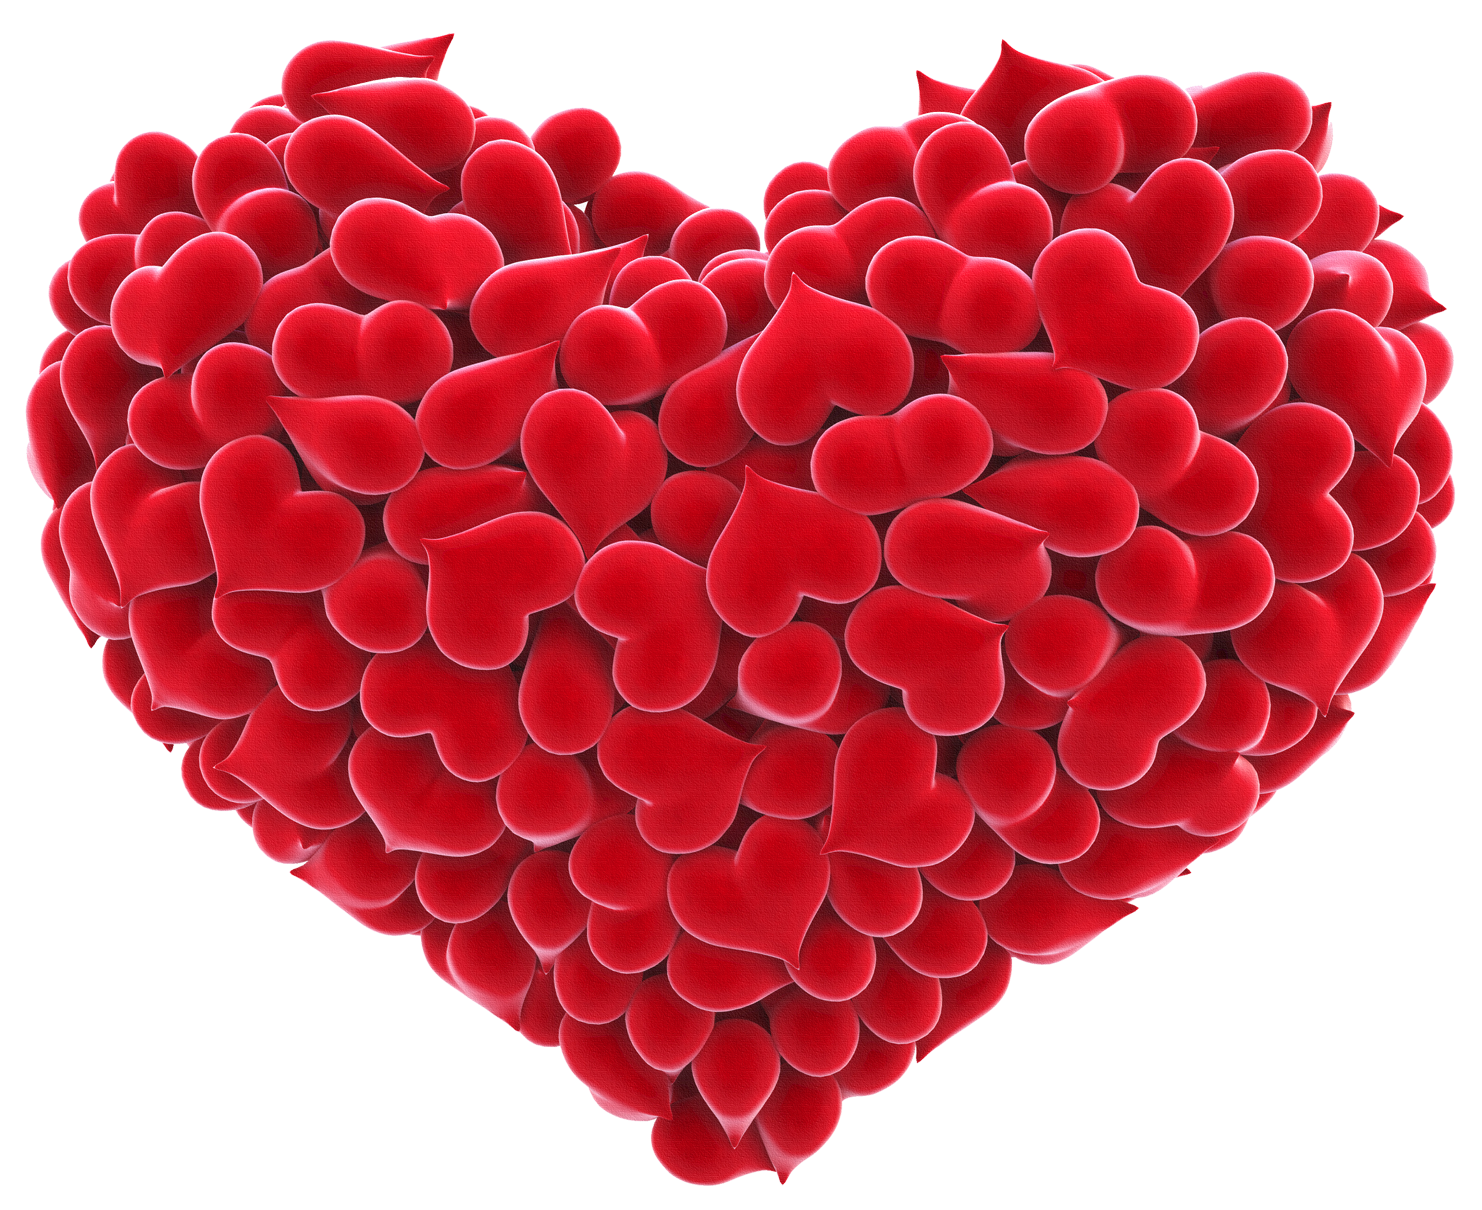 Heart PNG images Download  image, free download